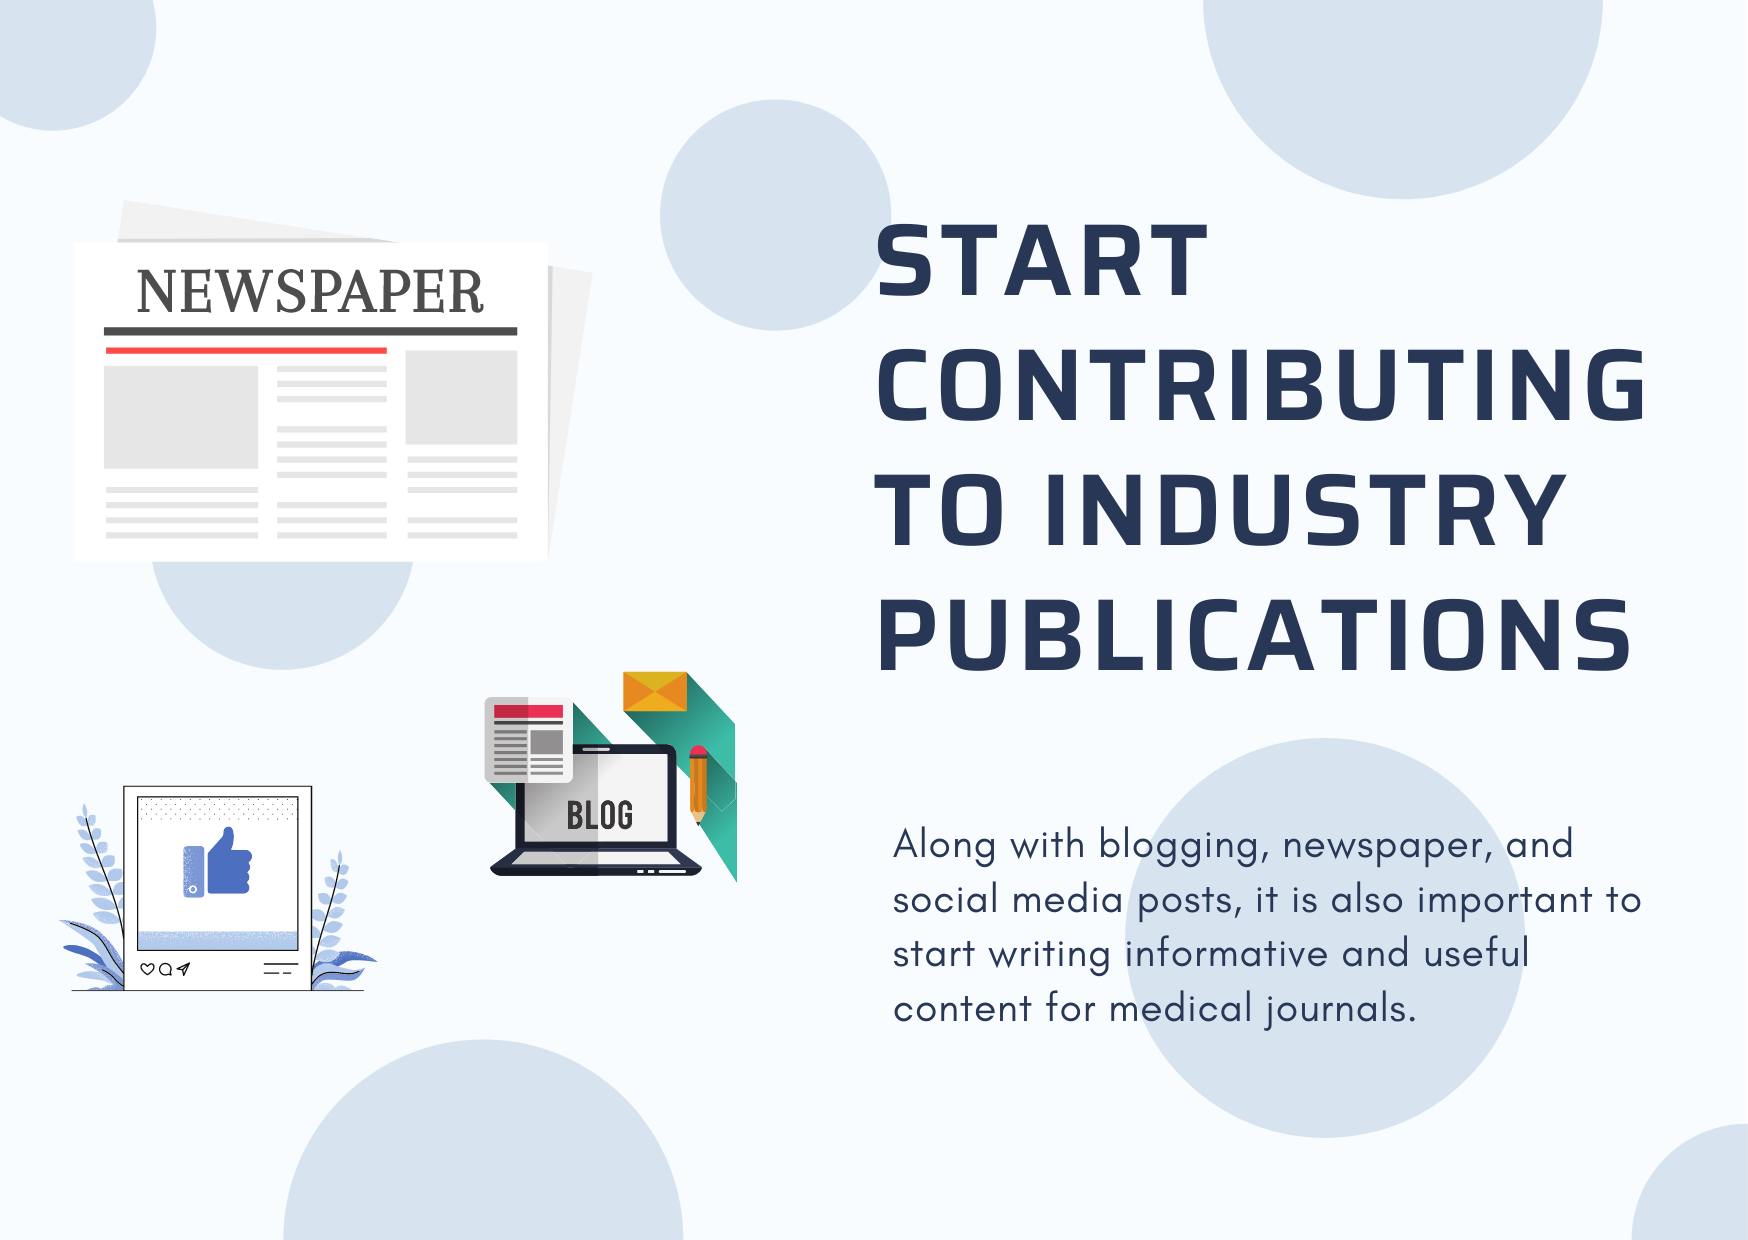 Start Contributing to Industry Publications